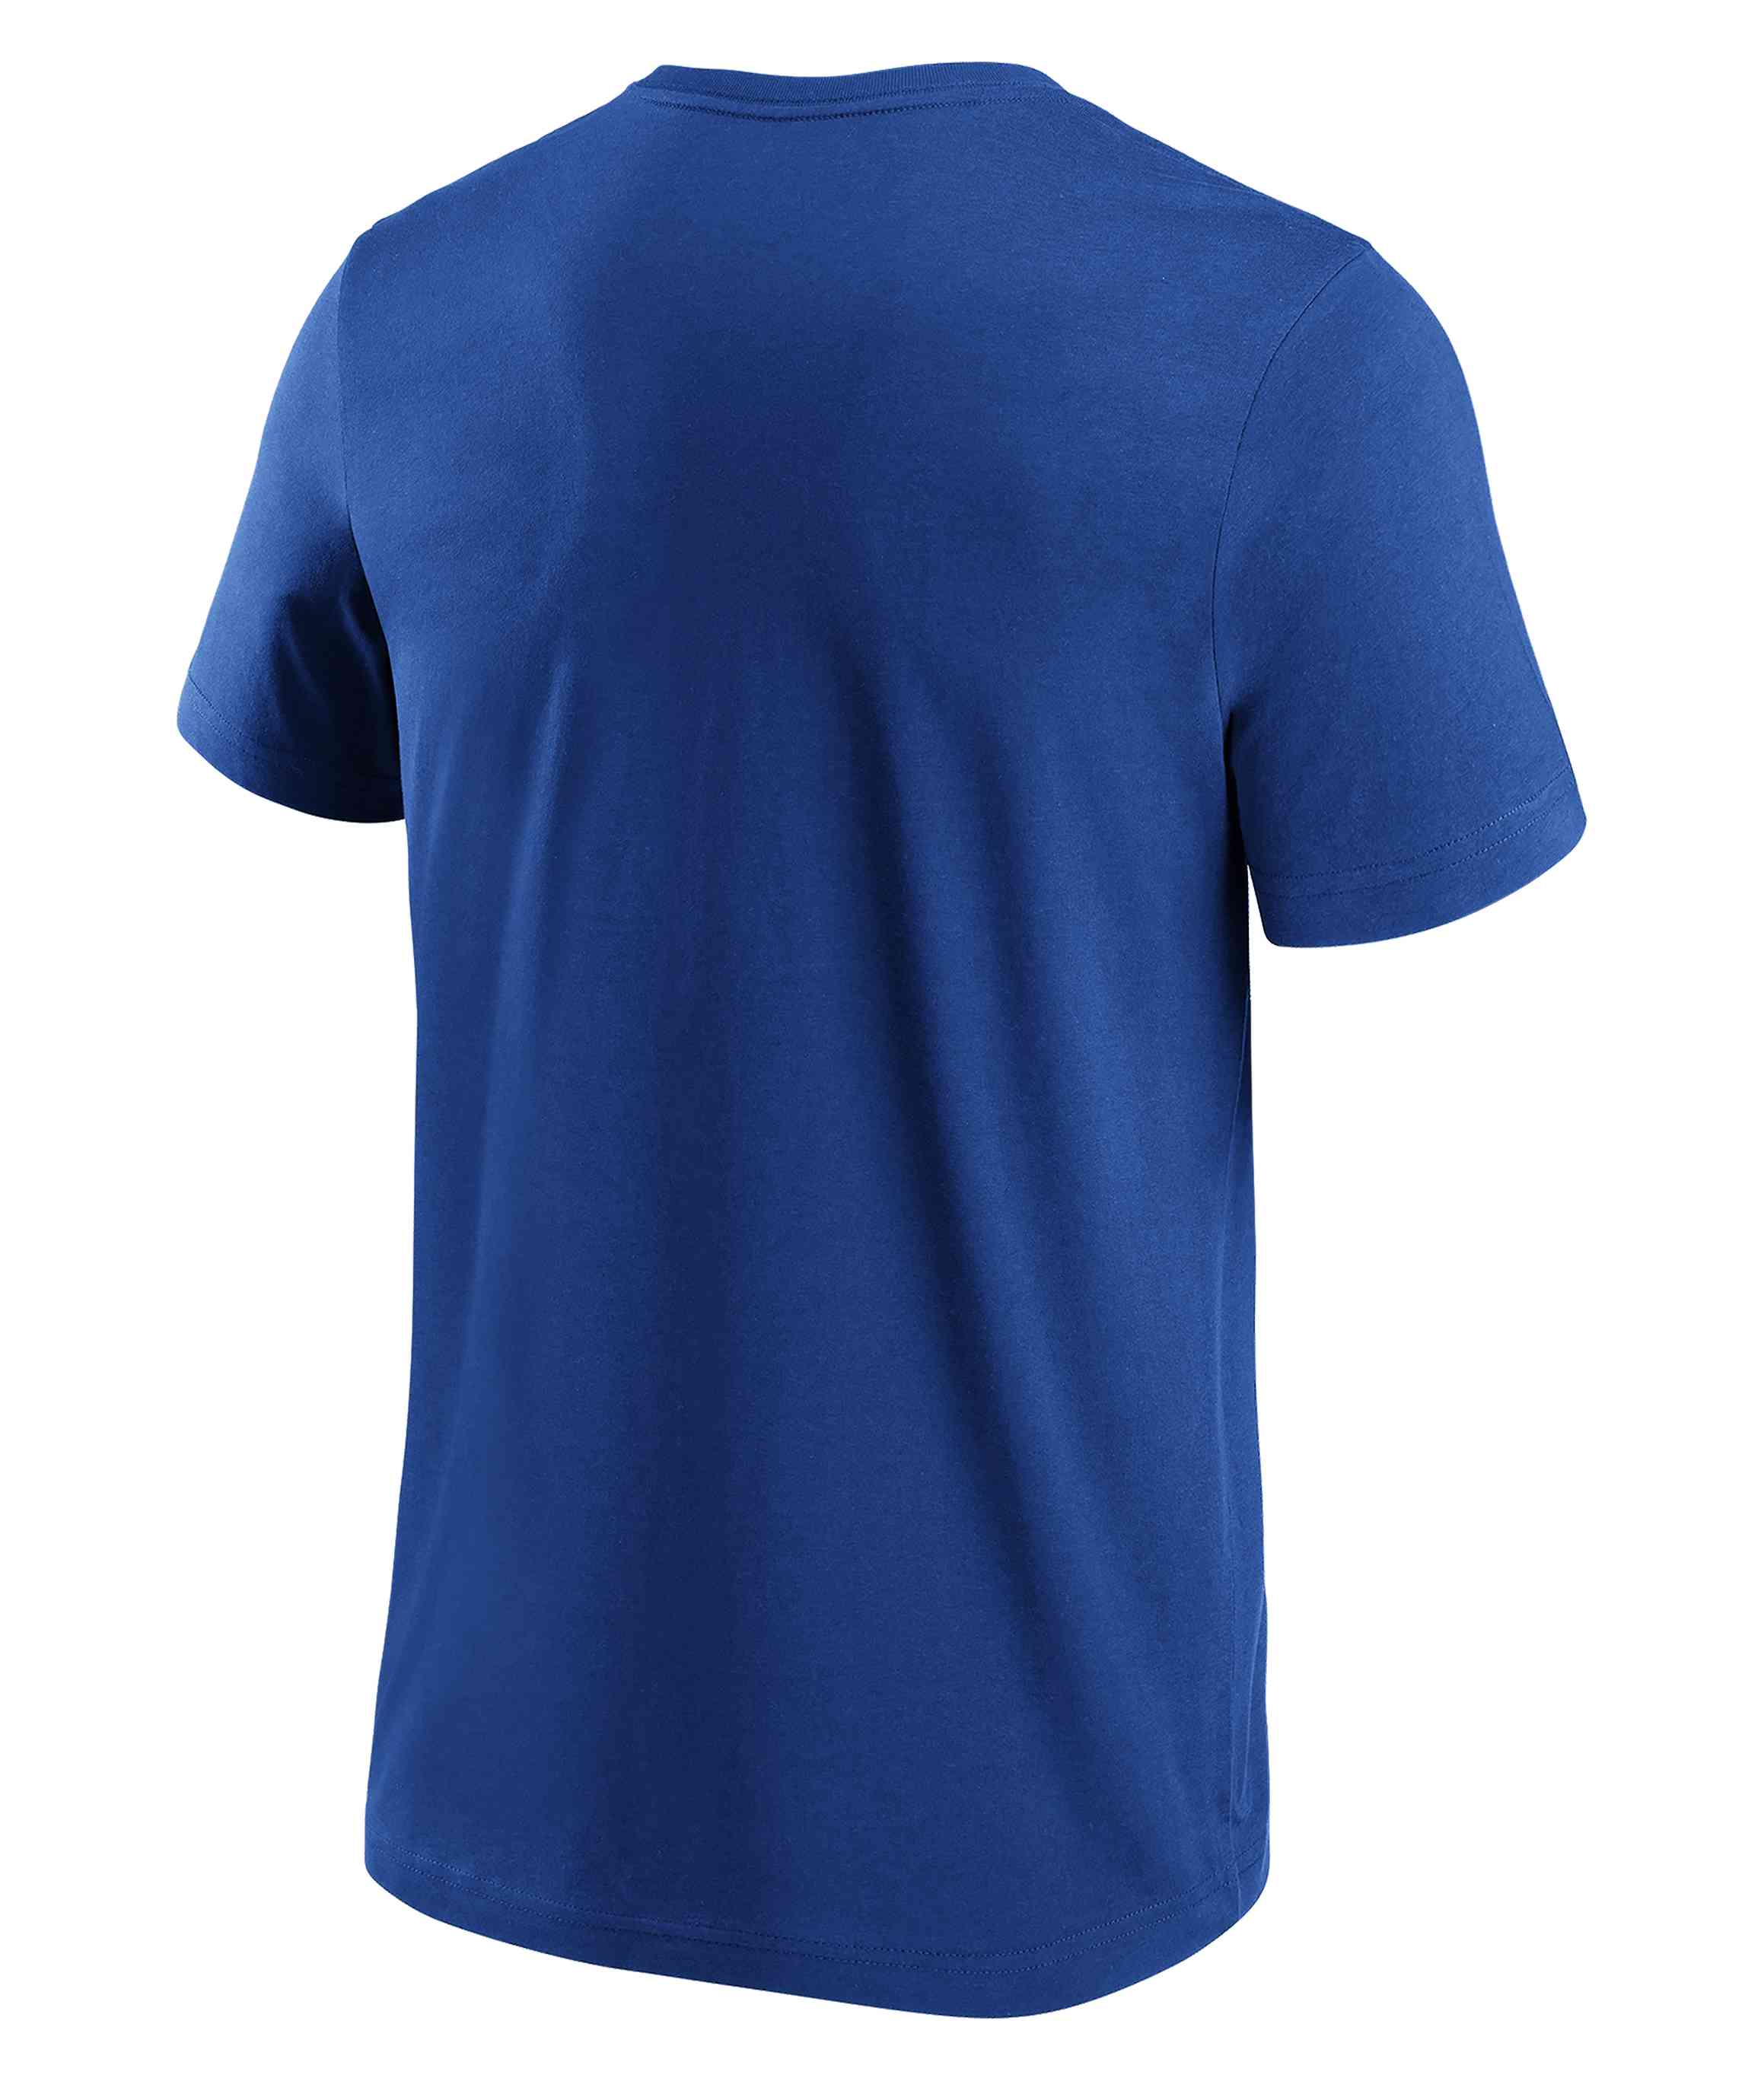 Fanatics - NFL Indianapolis Colts Primary Logo Graphic T-Shirt